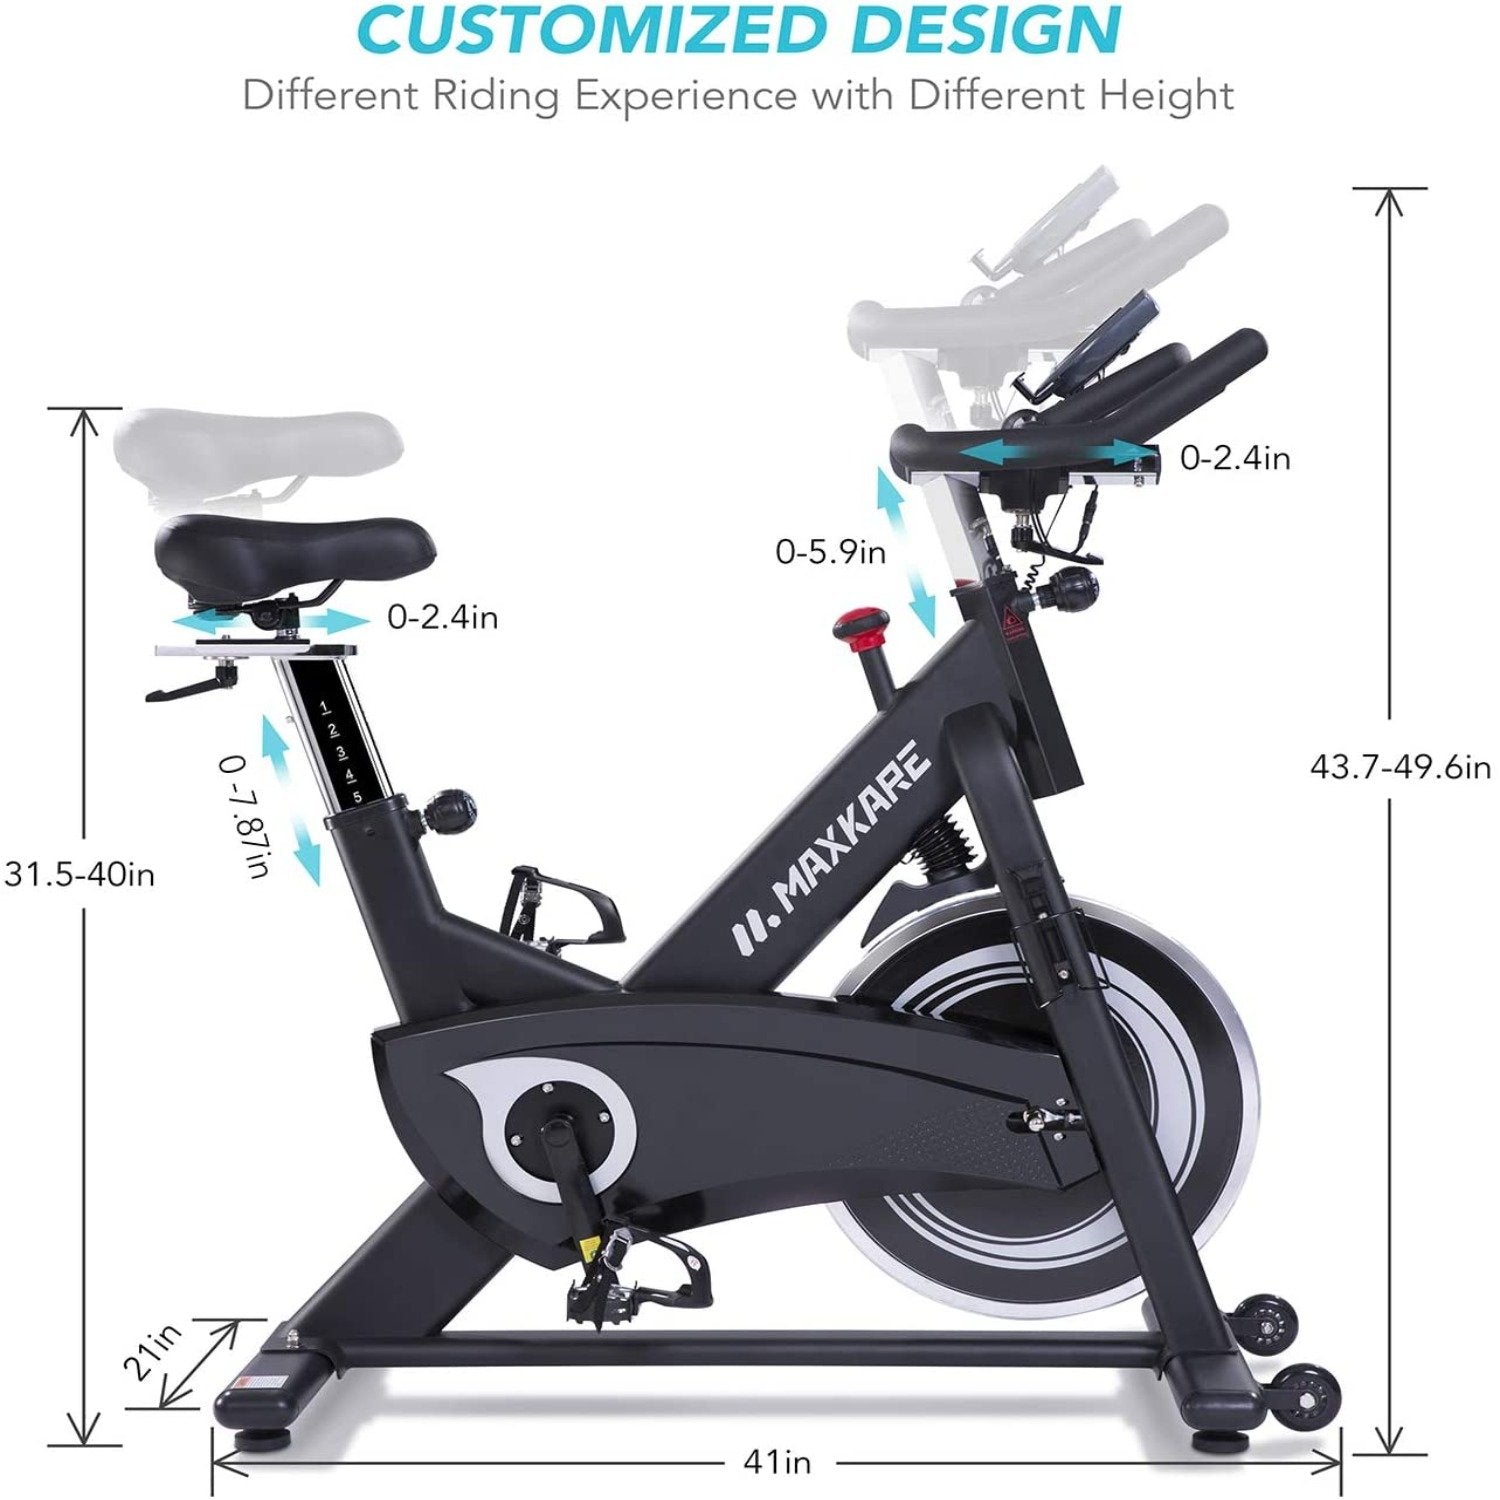 Load image into Gallery viewer, MaxKare Magnetic Exercise Bikes Stationary Belt Drive Indoor Cycling Bike with High Weight Capacity Adjustable Magnetic Resistance w/LCD Monitor - NAIPO
